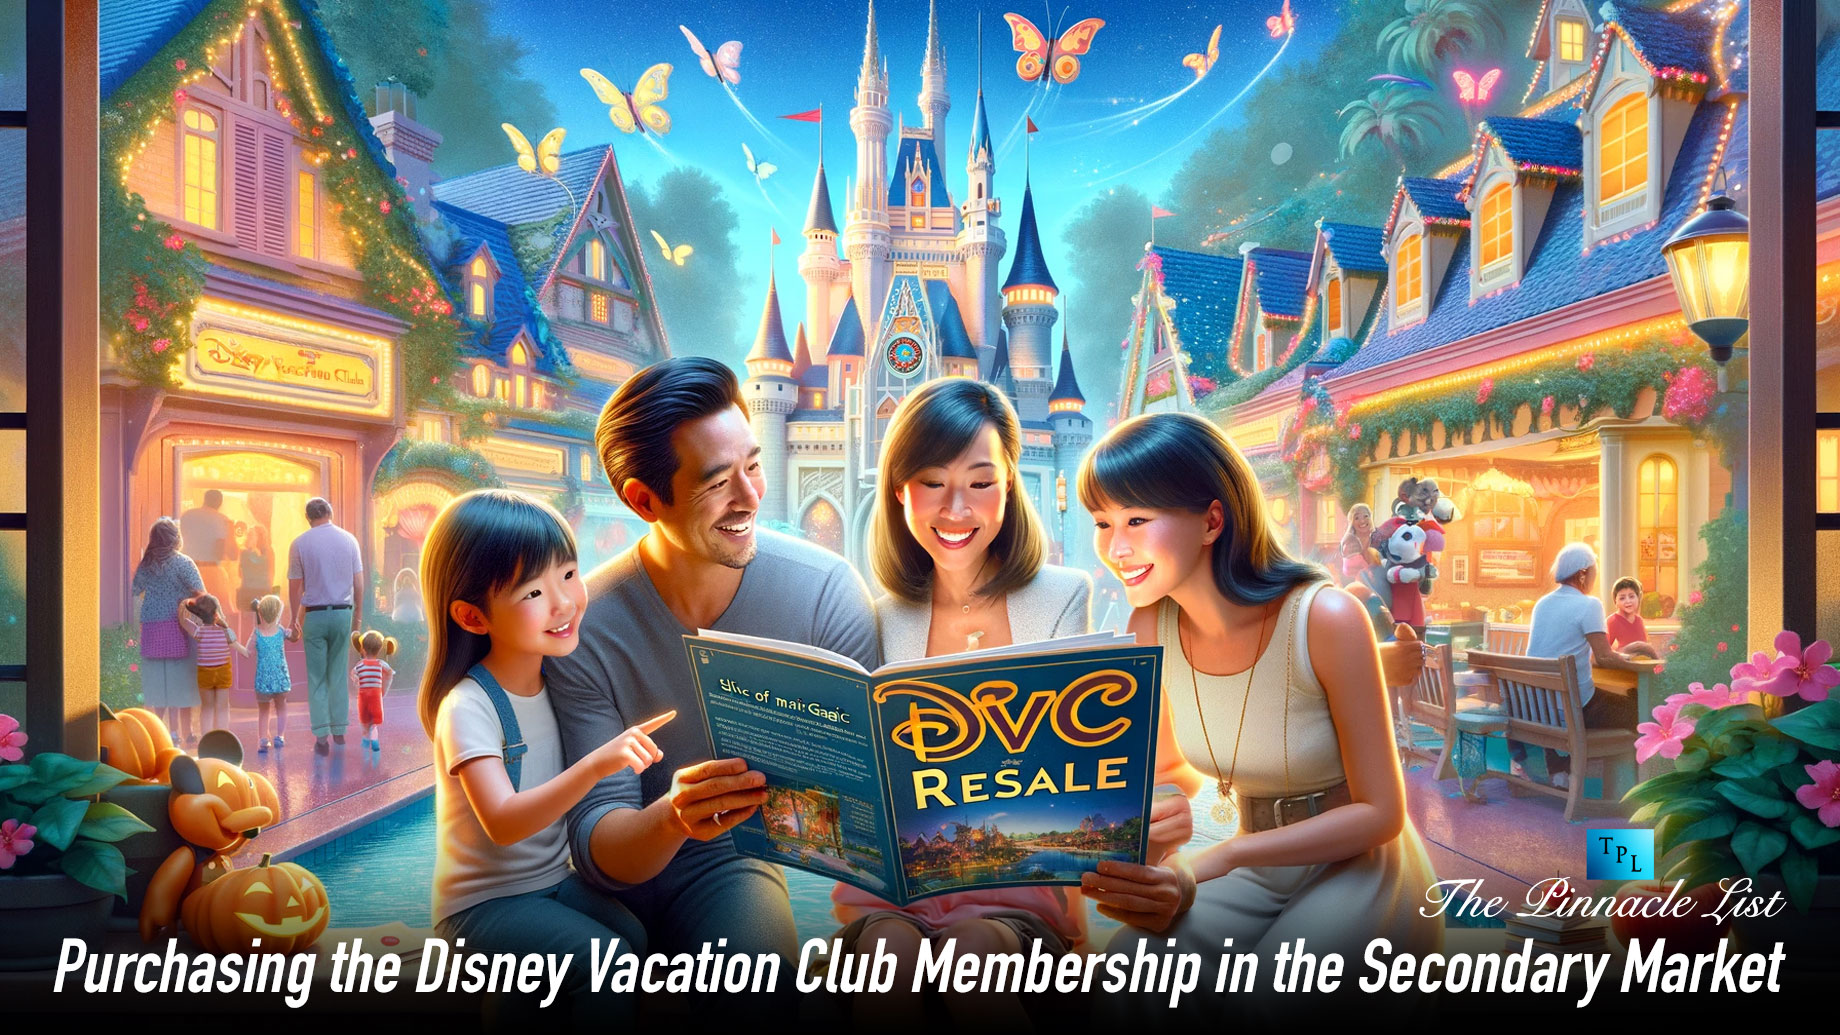 Purchasing the Disney Vacation Club Membership in the Secondary Market: The Benefits of Resale